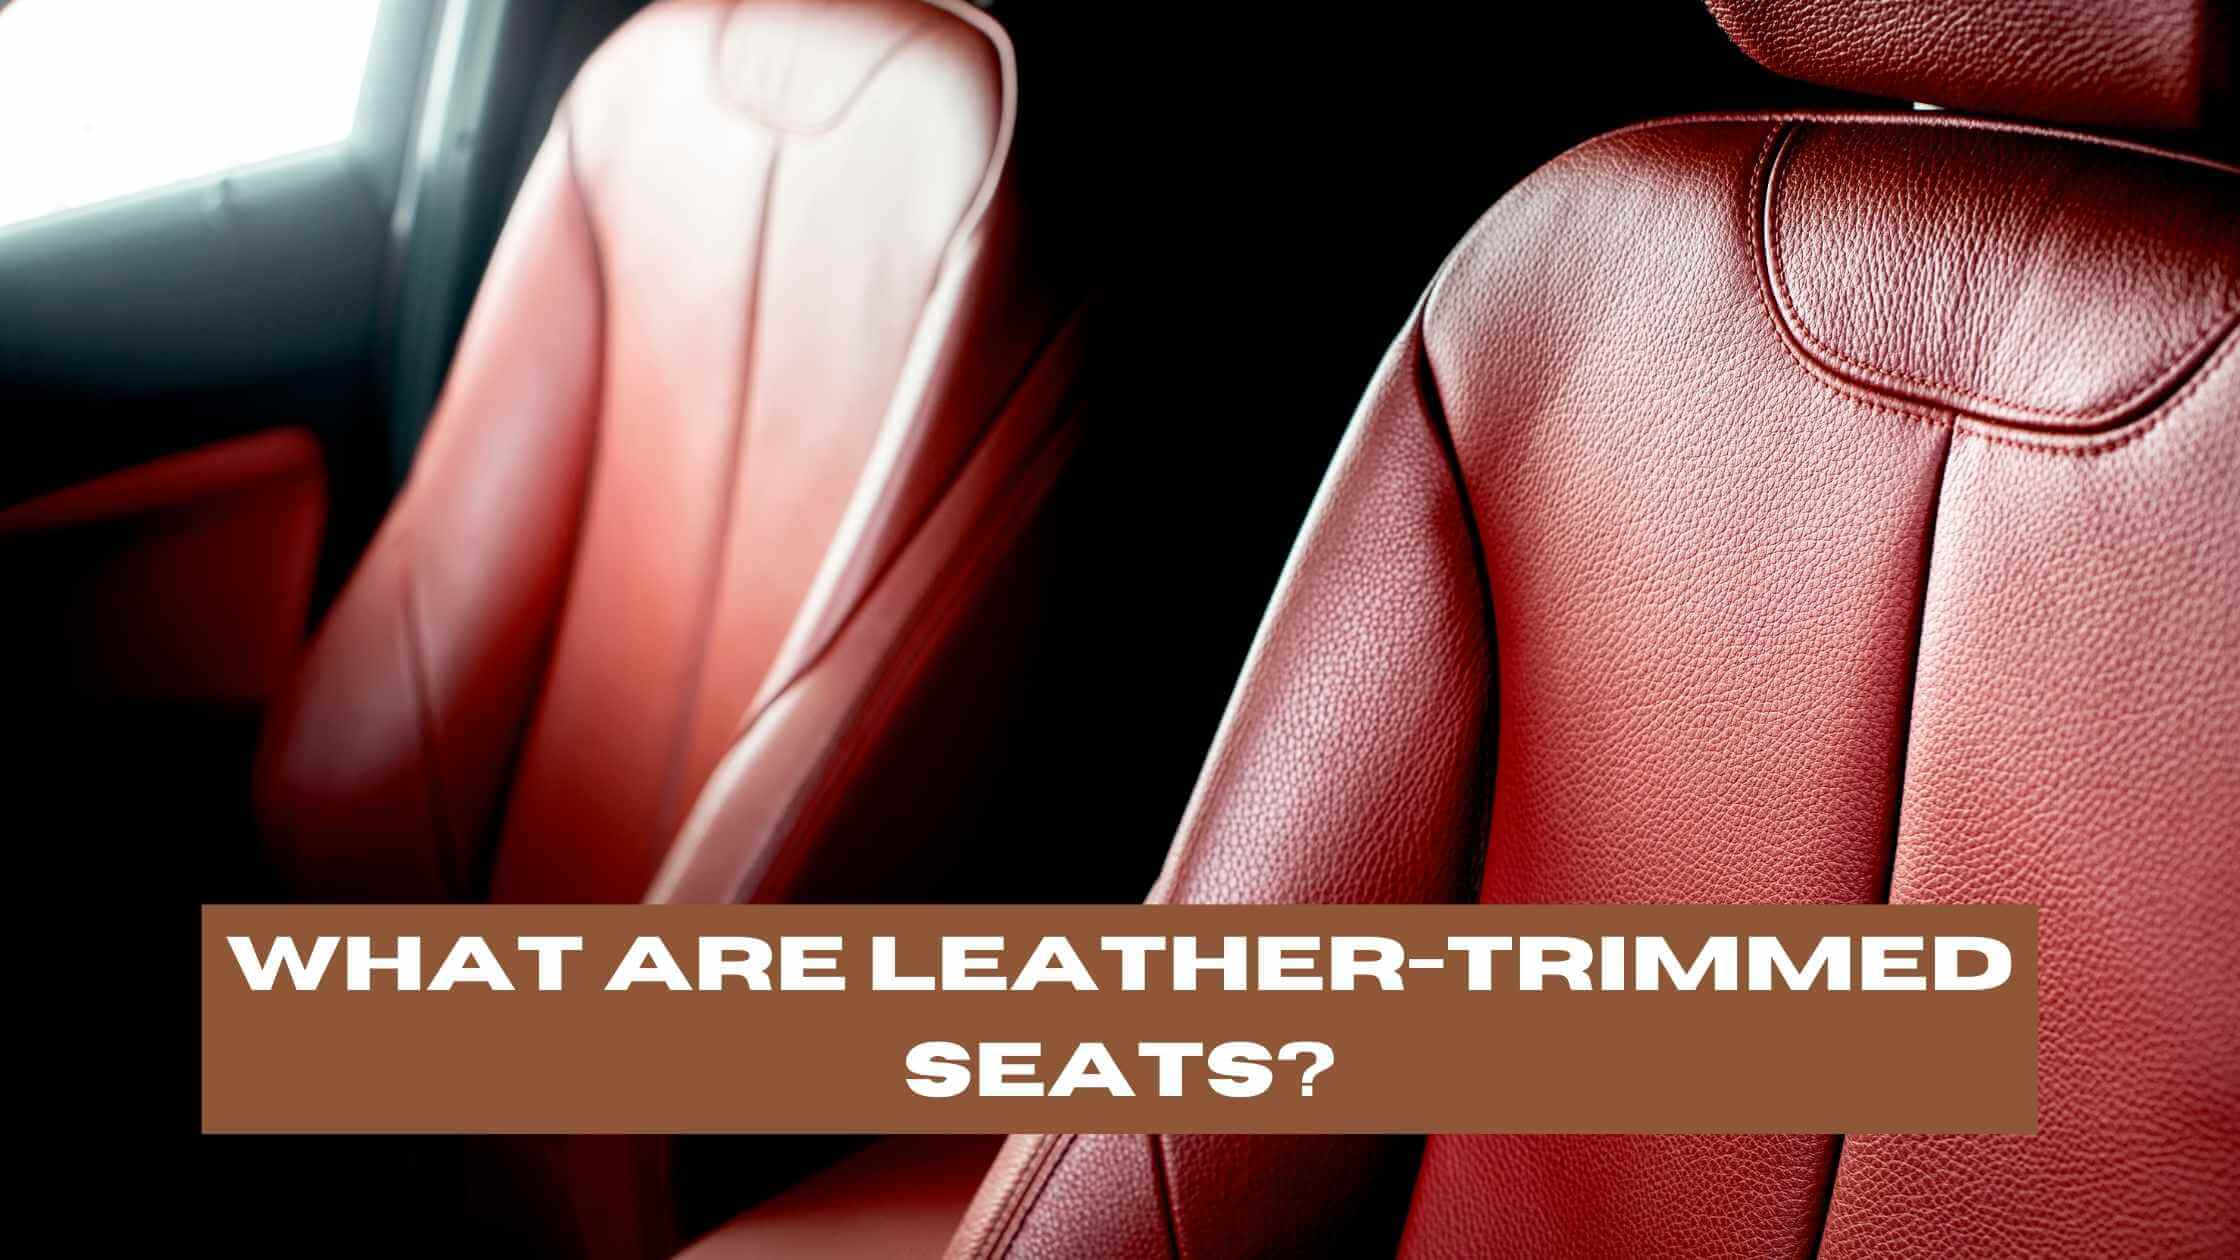 What Are Leather-Trimmed Seats